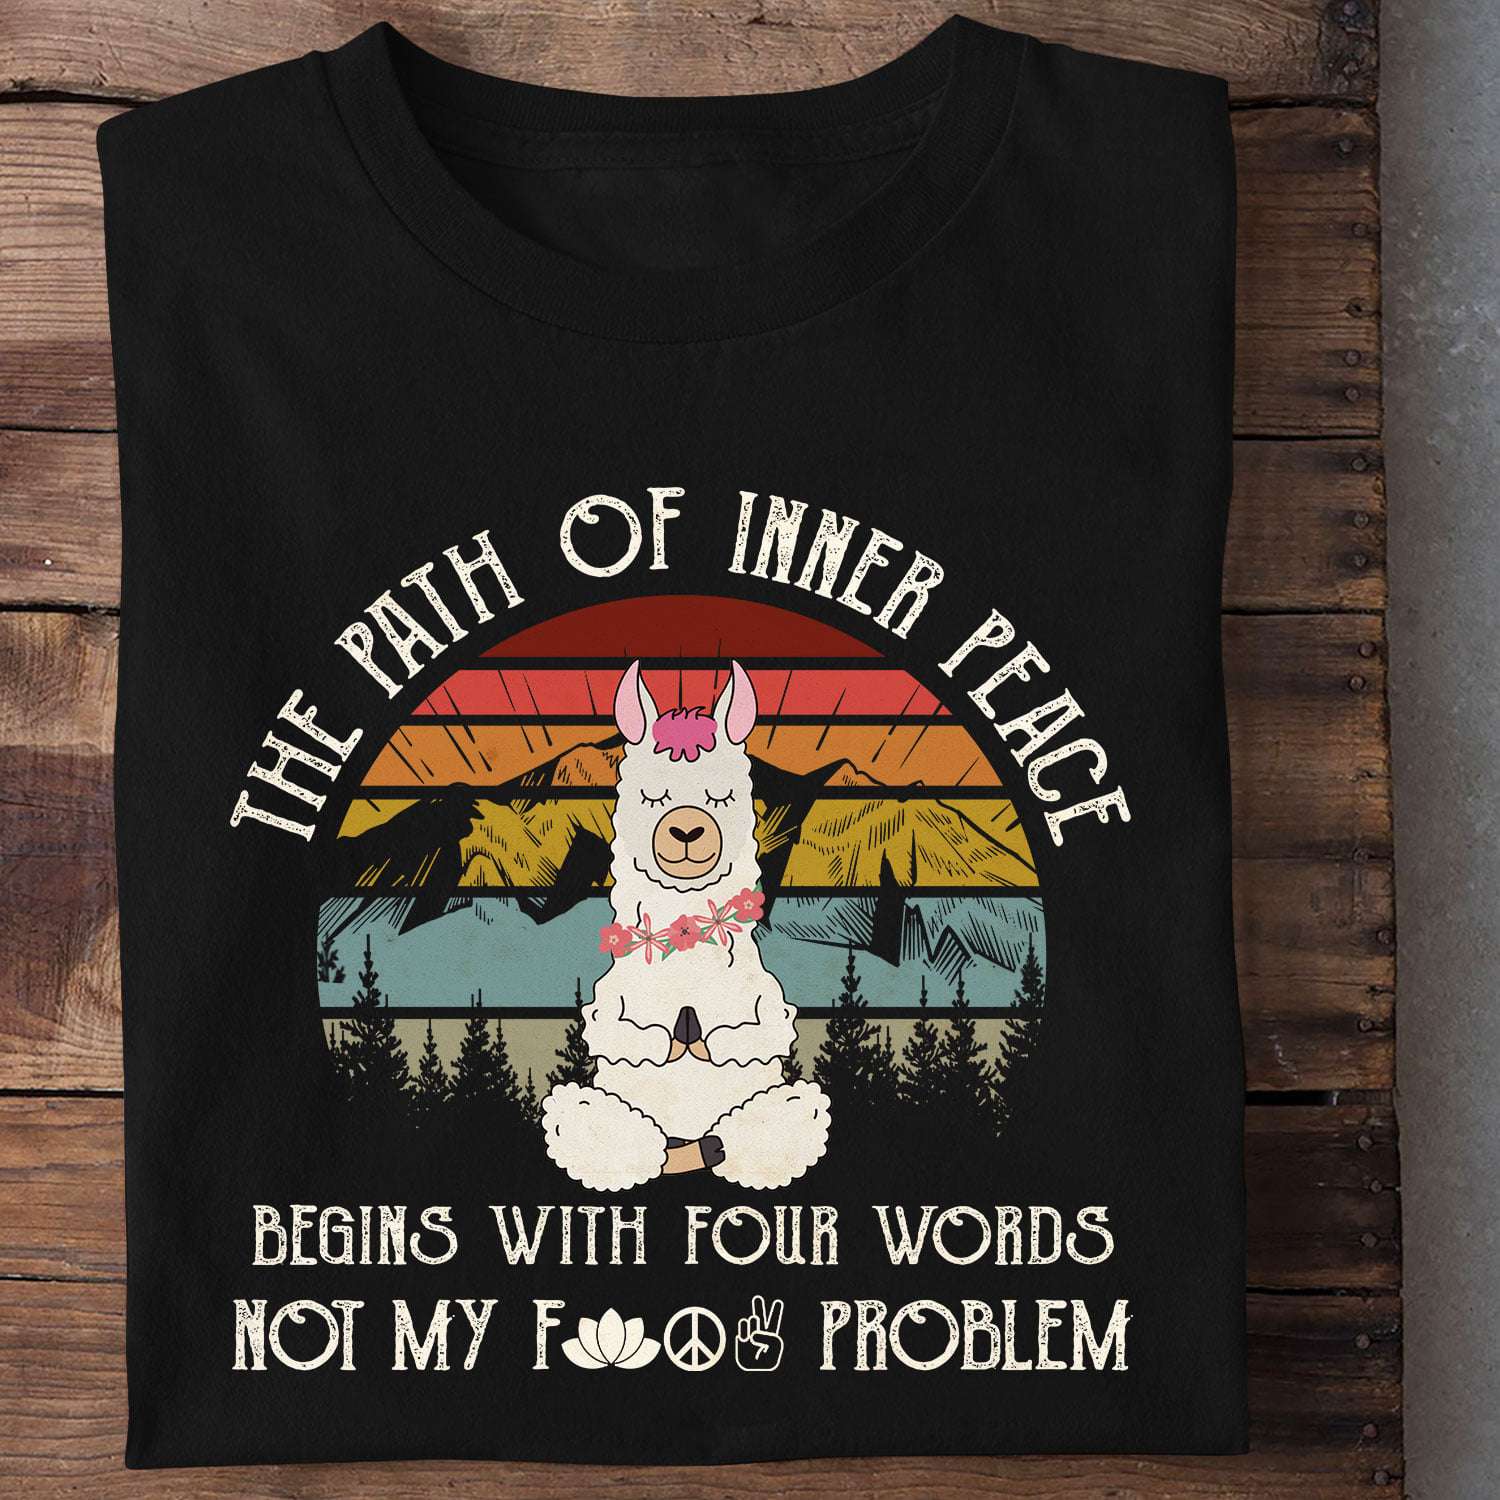 The path of inner peace, begins with four words, not fucking problem - Llama doing yoga